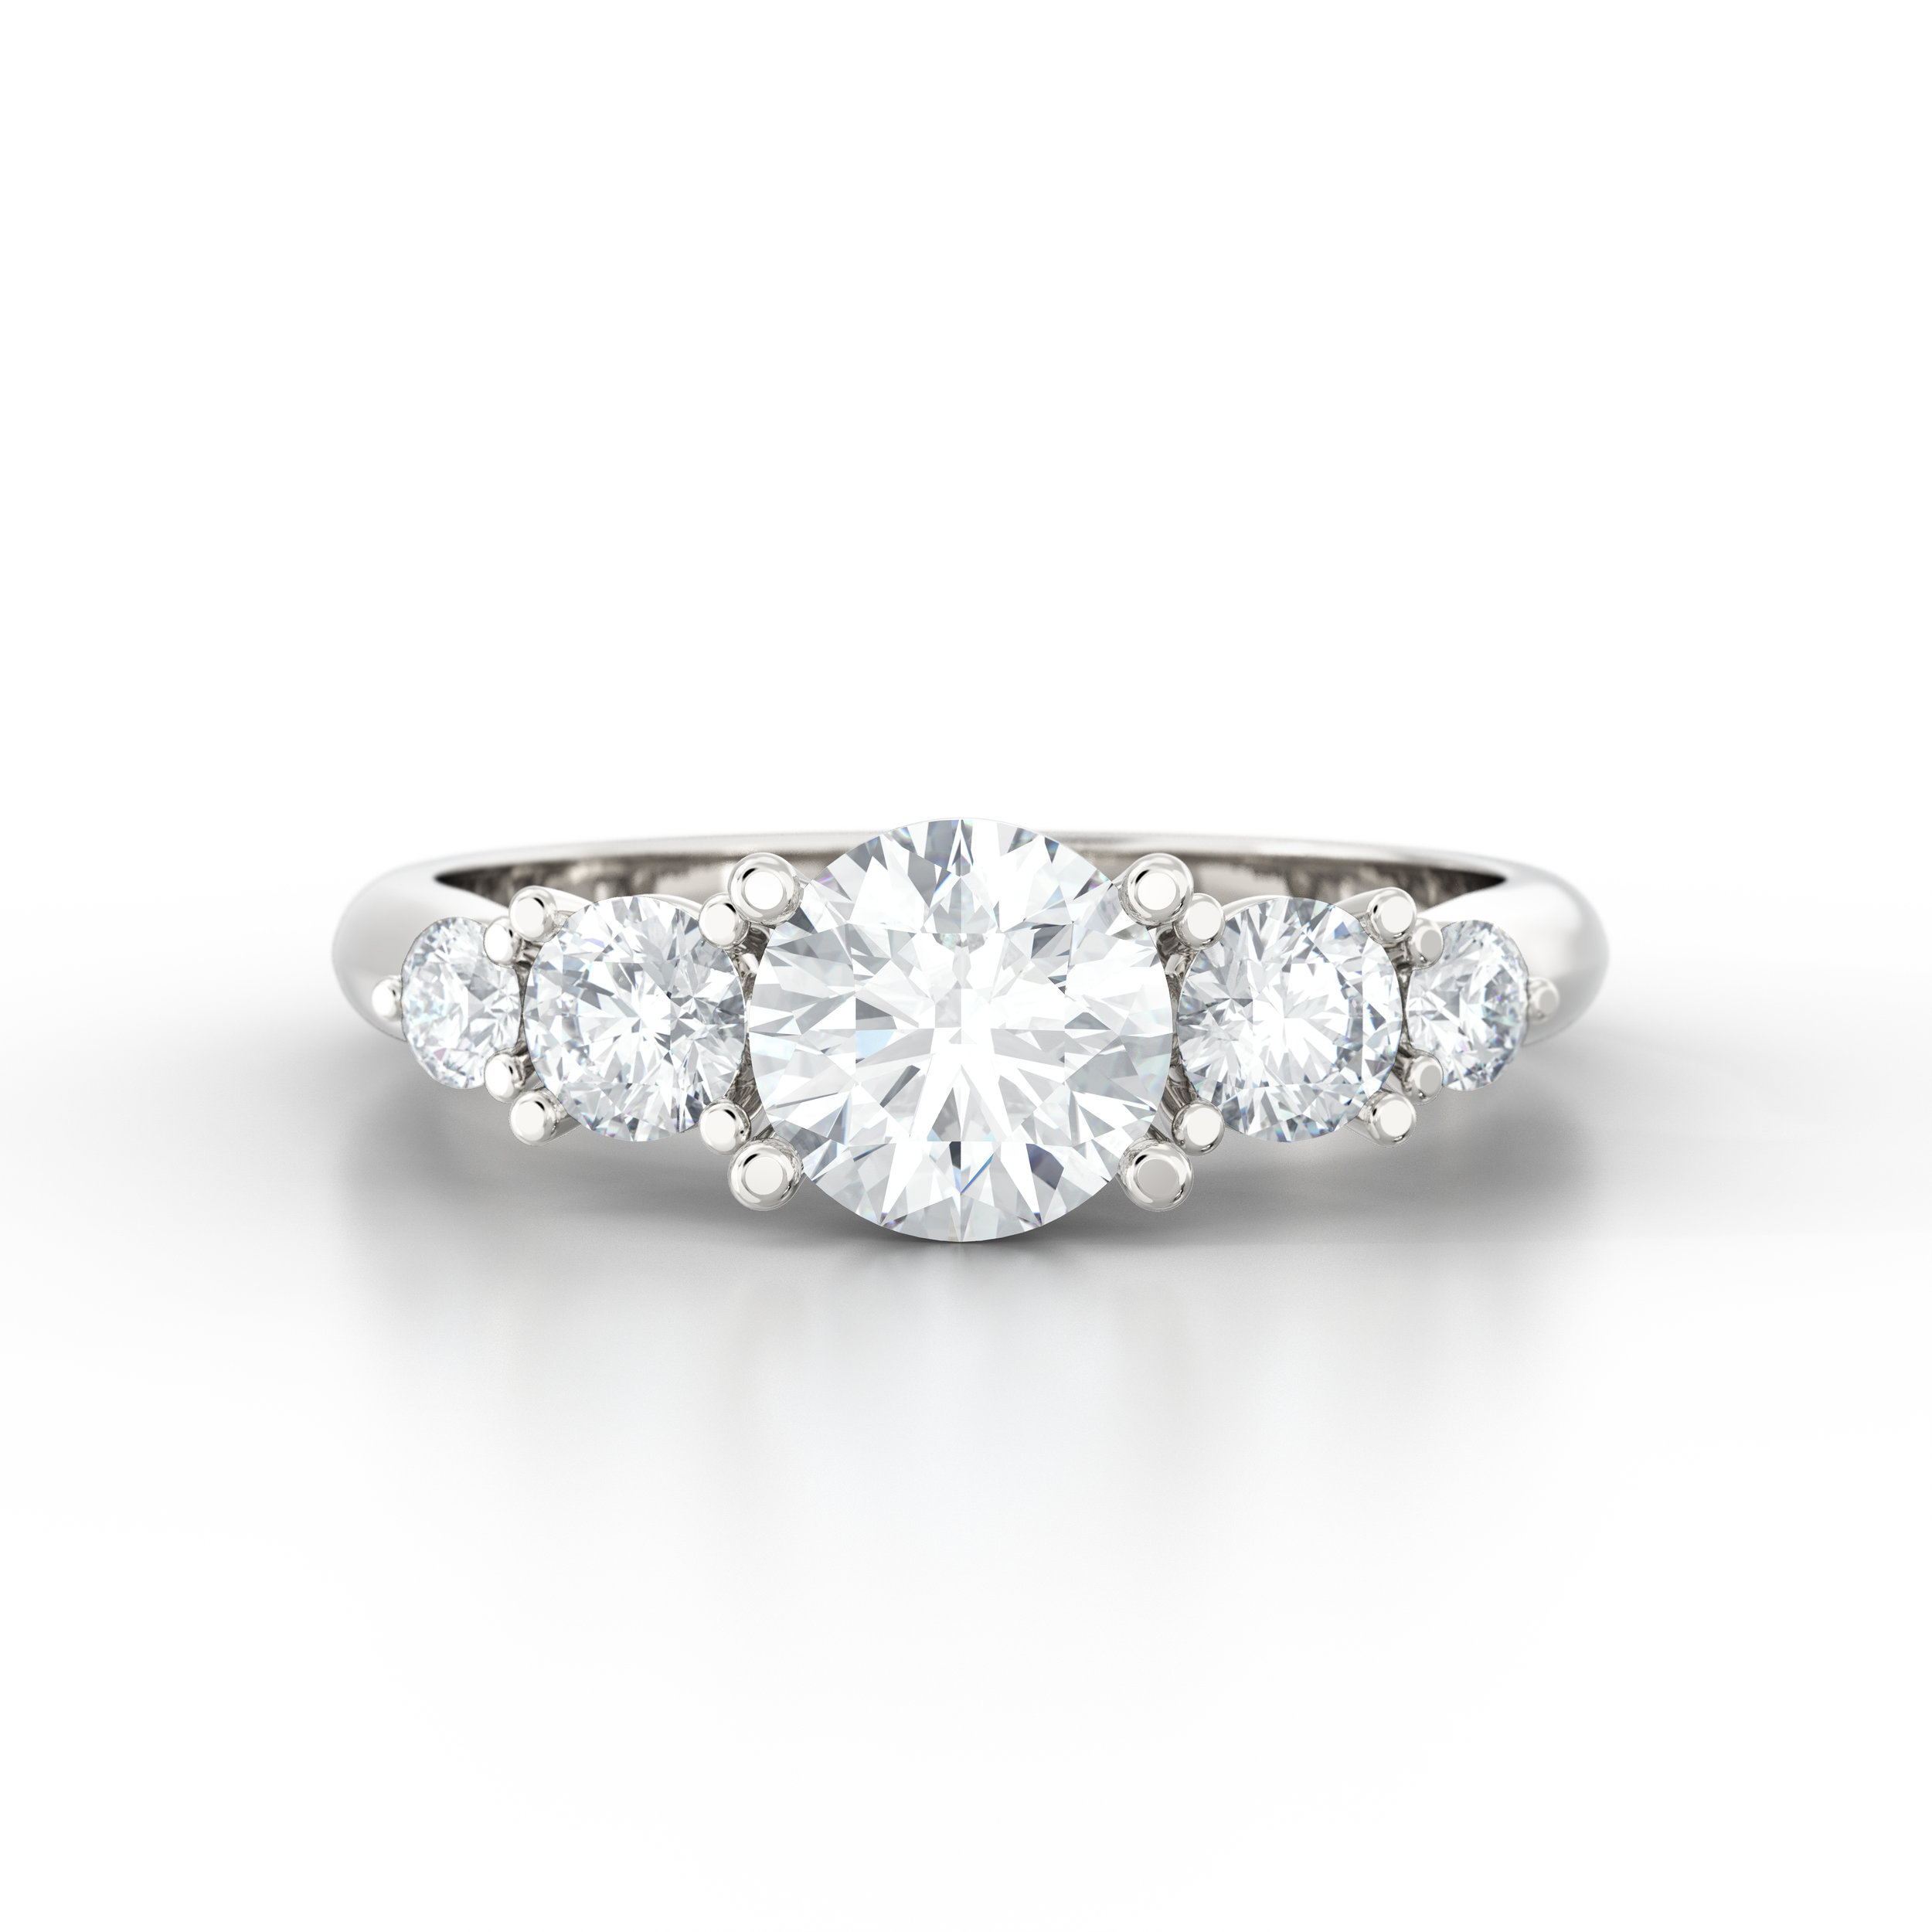 Vintage Engagement Rings | Hatton Garden | London Victorian Ring Co